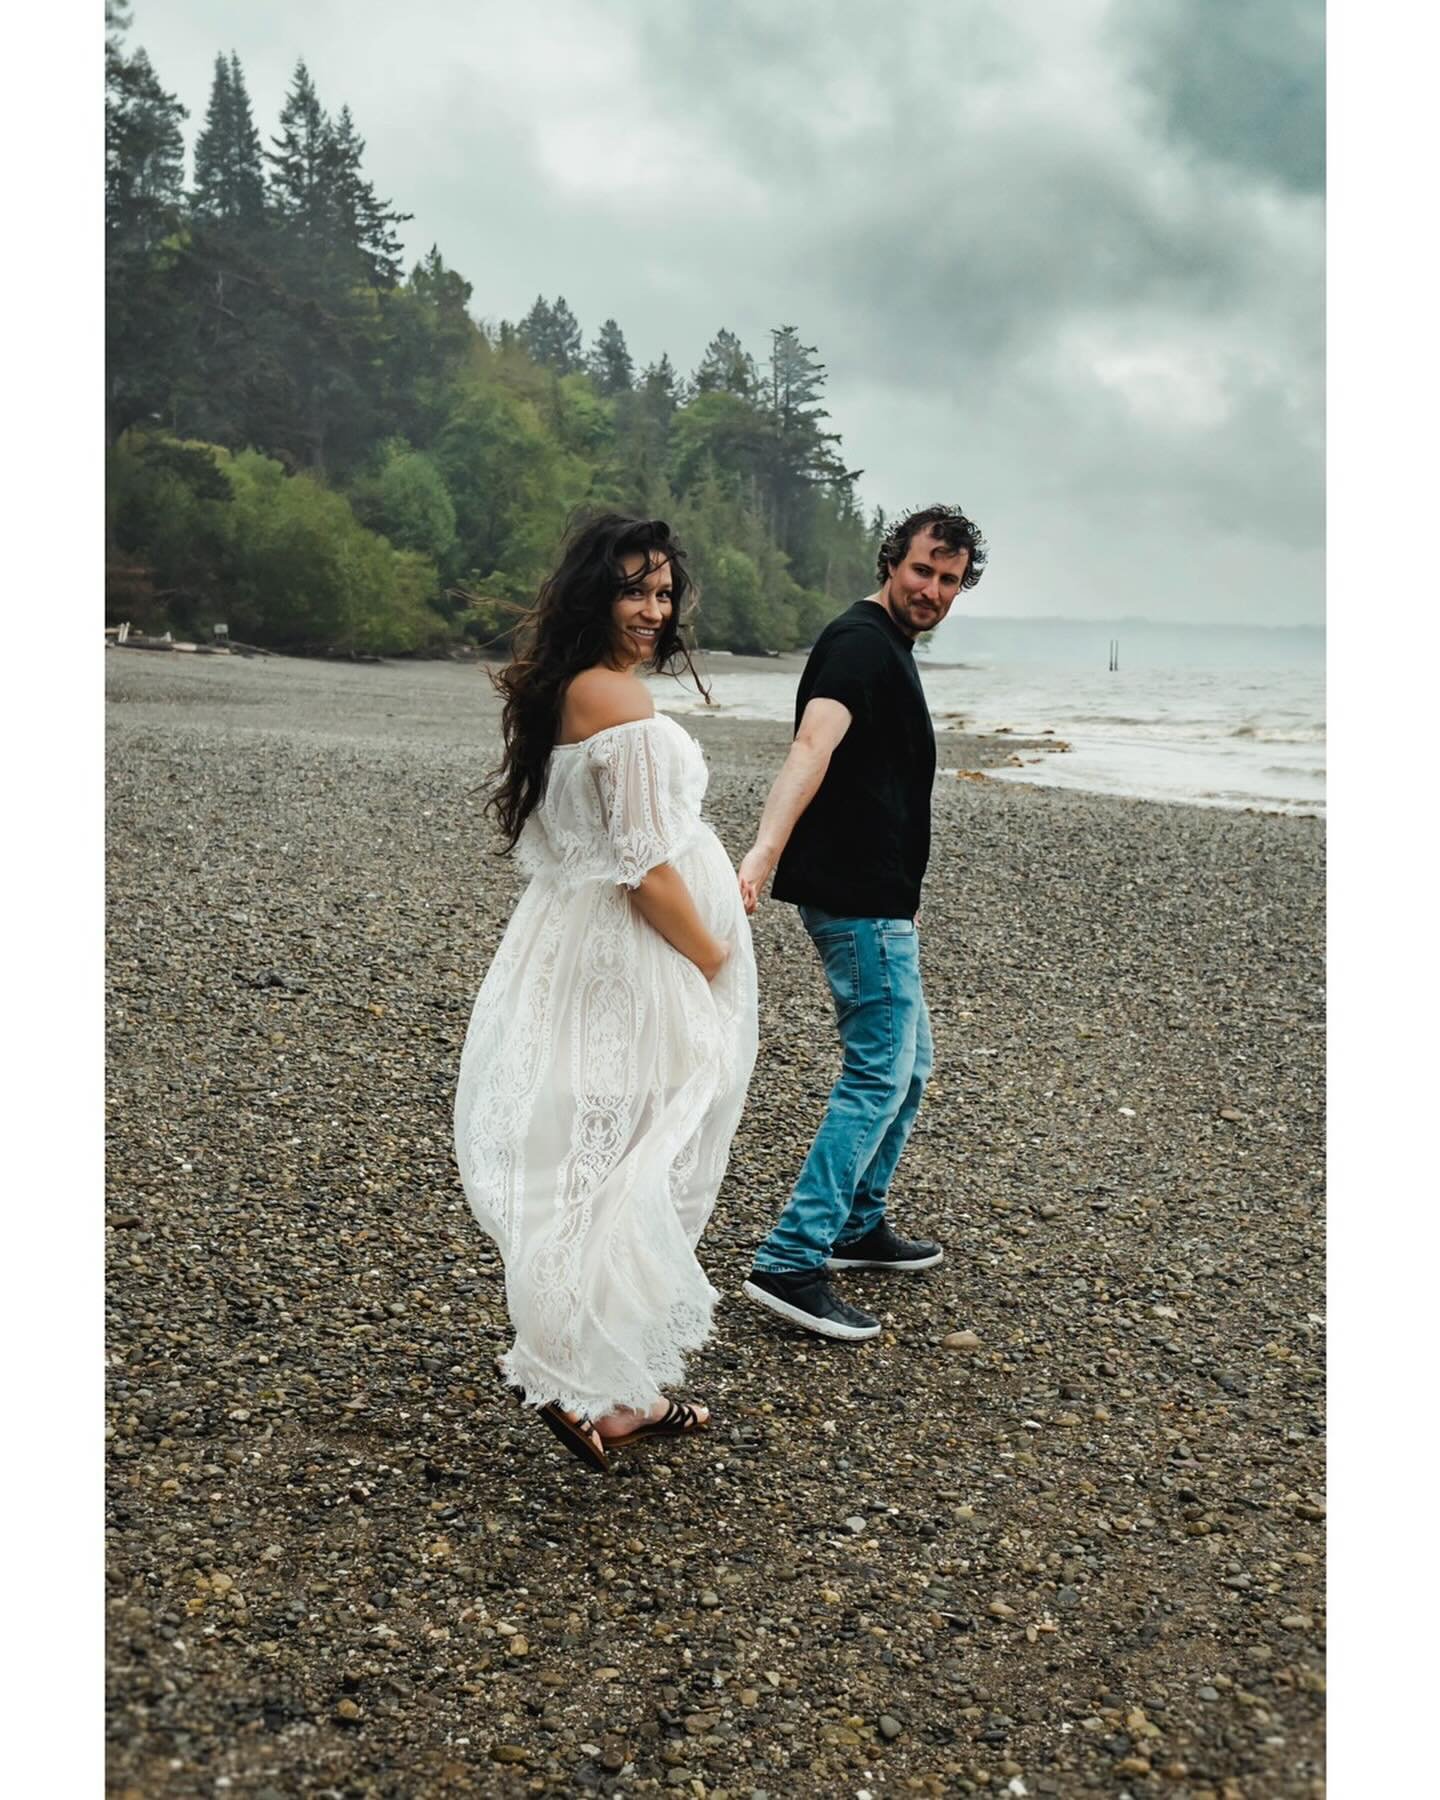 Last night we hiked down to the beach and were met with winds so strong you couldn&rsquo;t hold an umbrella! So cold you couldn&rsquo;t feel your fingers + ended with showers and dancing in the rain. (Swipe to the end to see that!)

But you know what